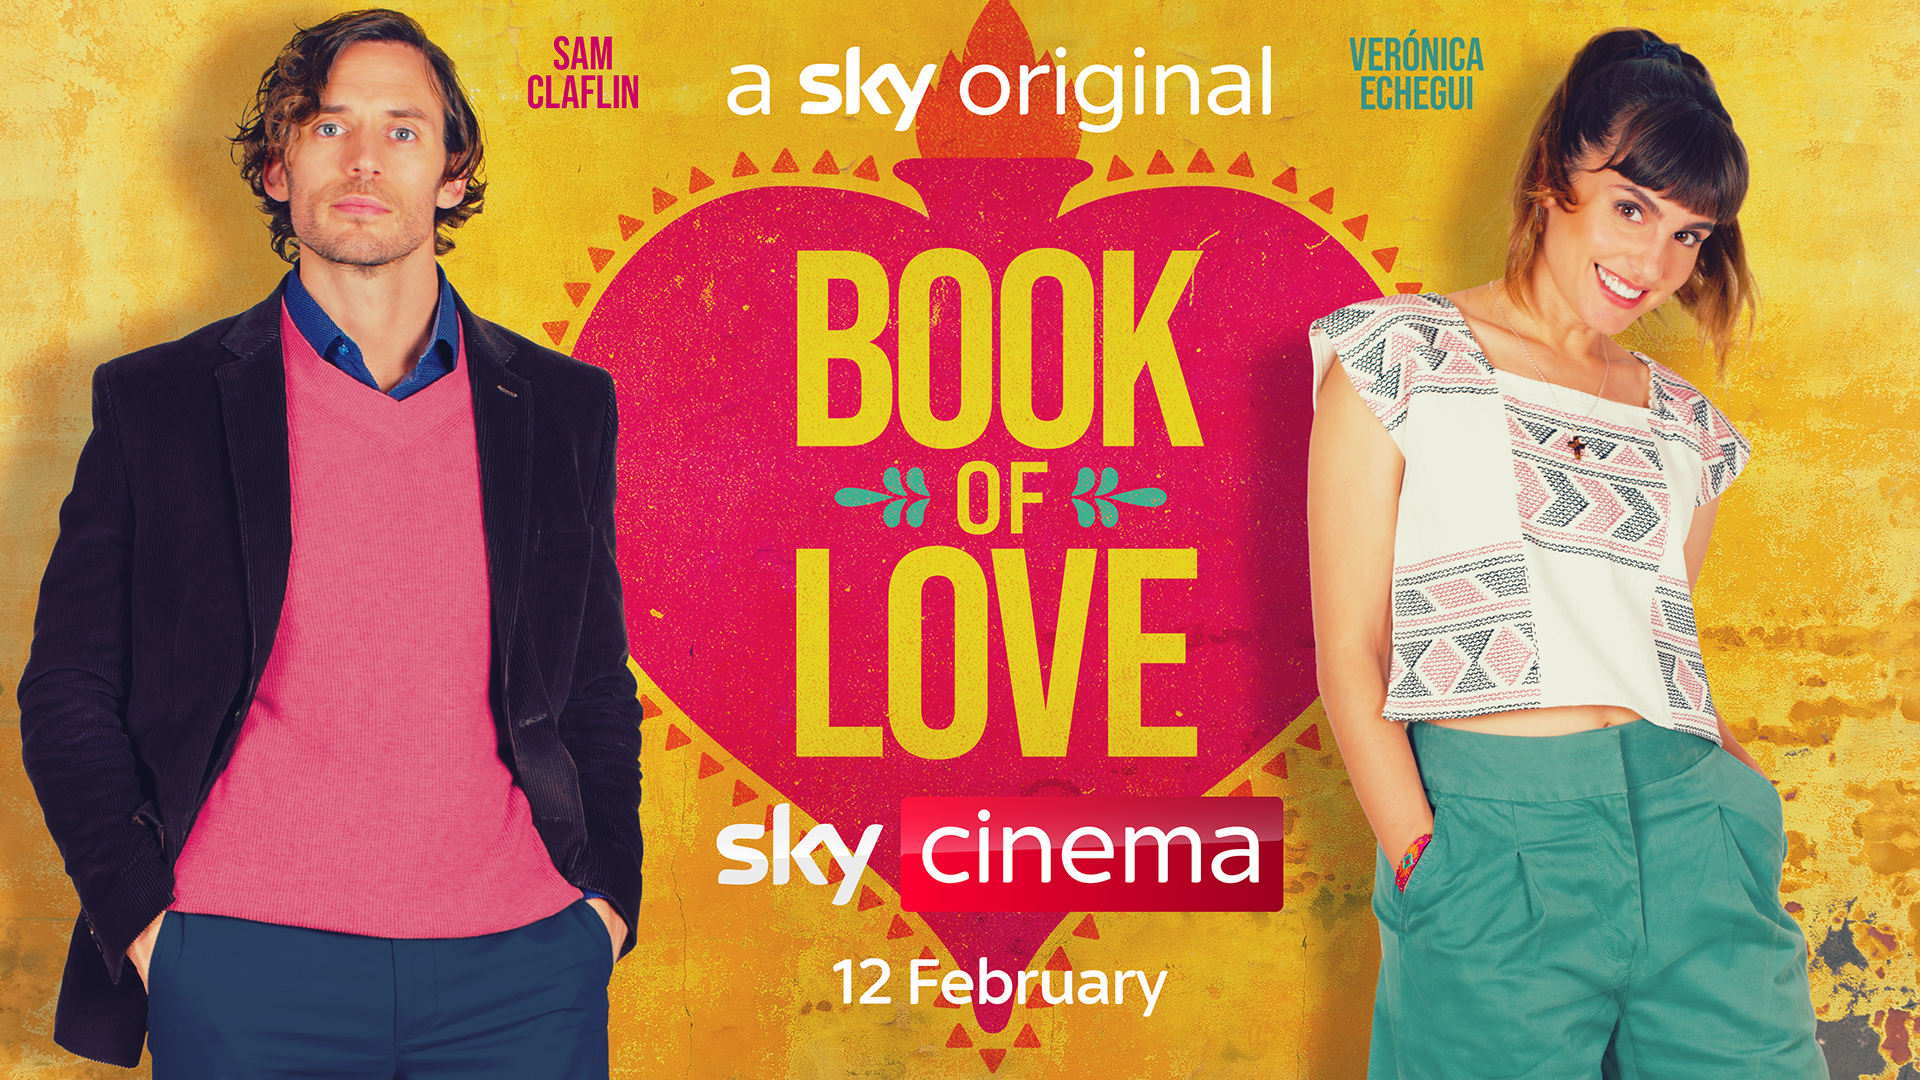 The Book Of Love poster, with Sam Claflin in a pink jumper and black blazer on the left and Veronica Echegui in a white t-shirt patterned with pink and grey arrows and green trousers on the right, both with their hands in their pockets